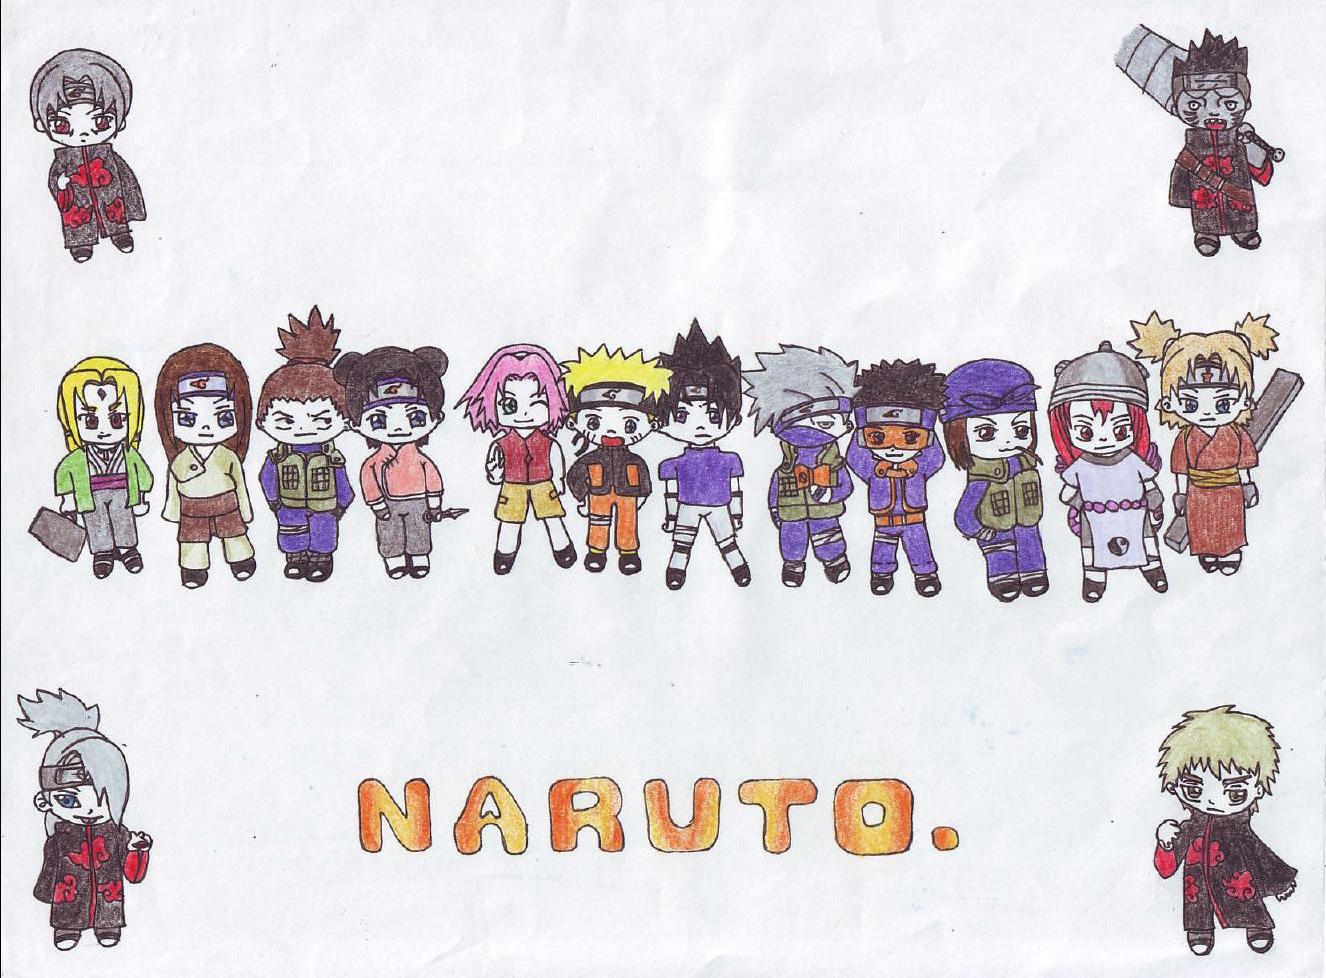 Naruto for 1mangalover's contest by Erien